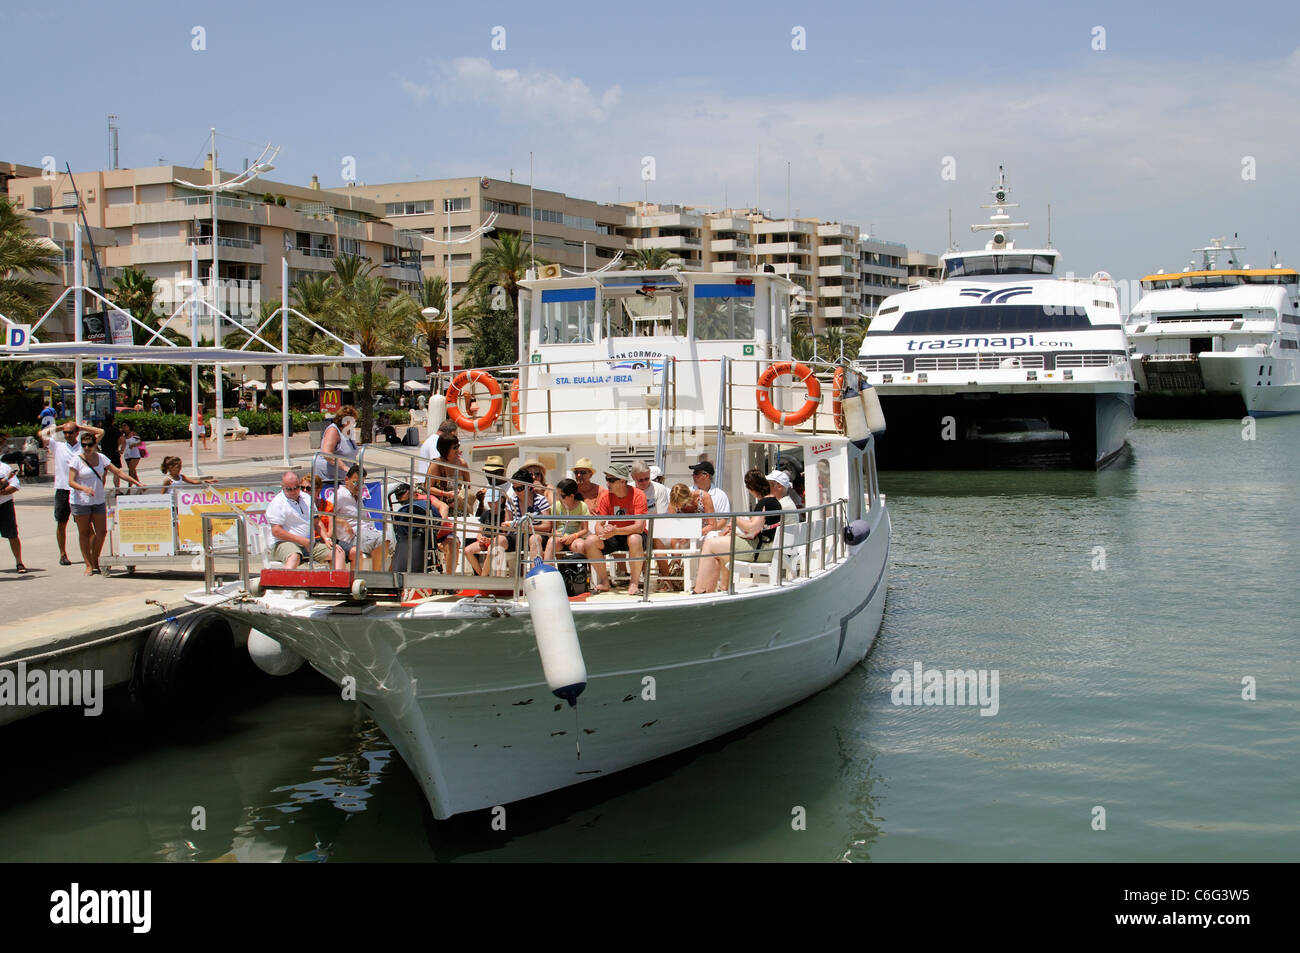 Passenger ferry boarding for a trip to St Eulalia from the quay at Eivissa Ibiza Spanish island Stock Photo